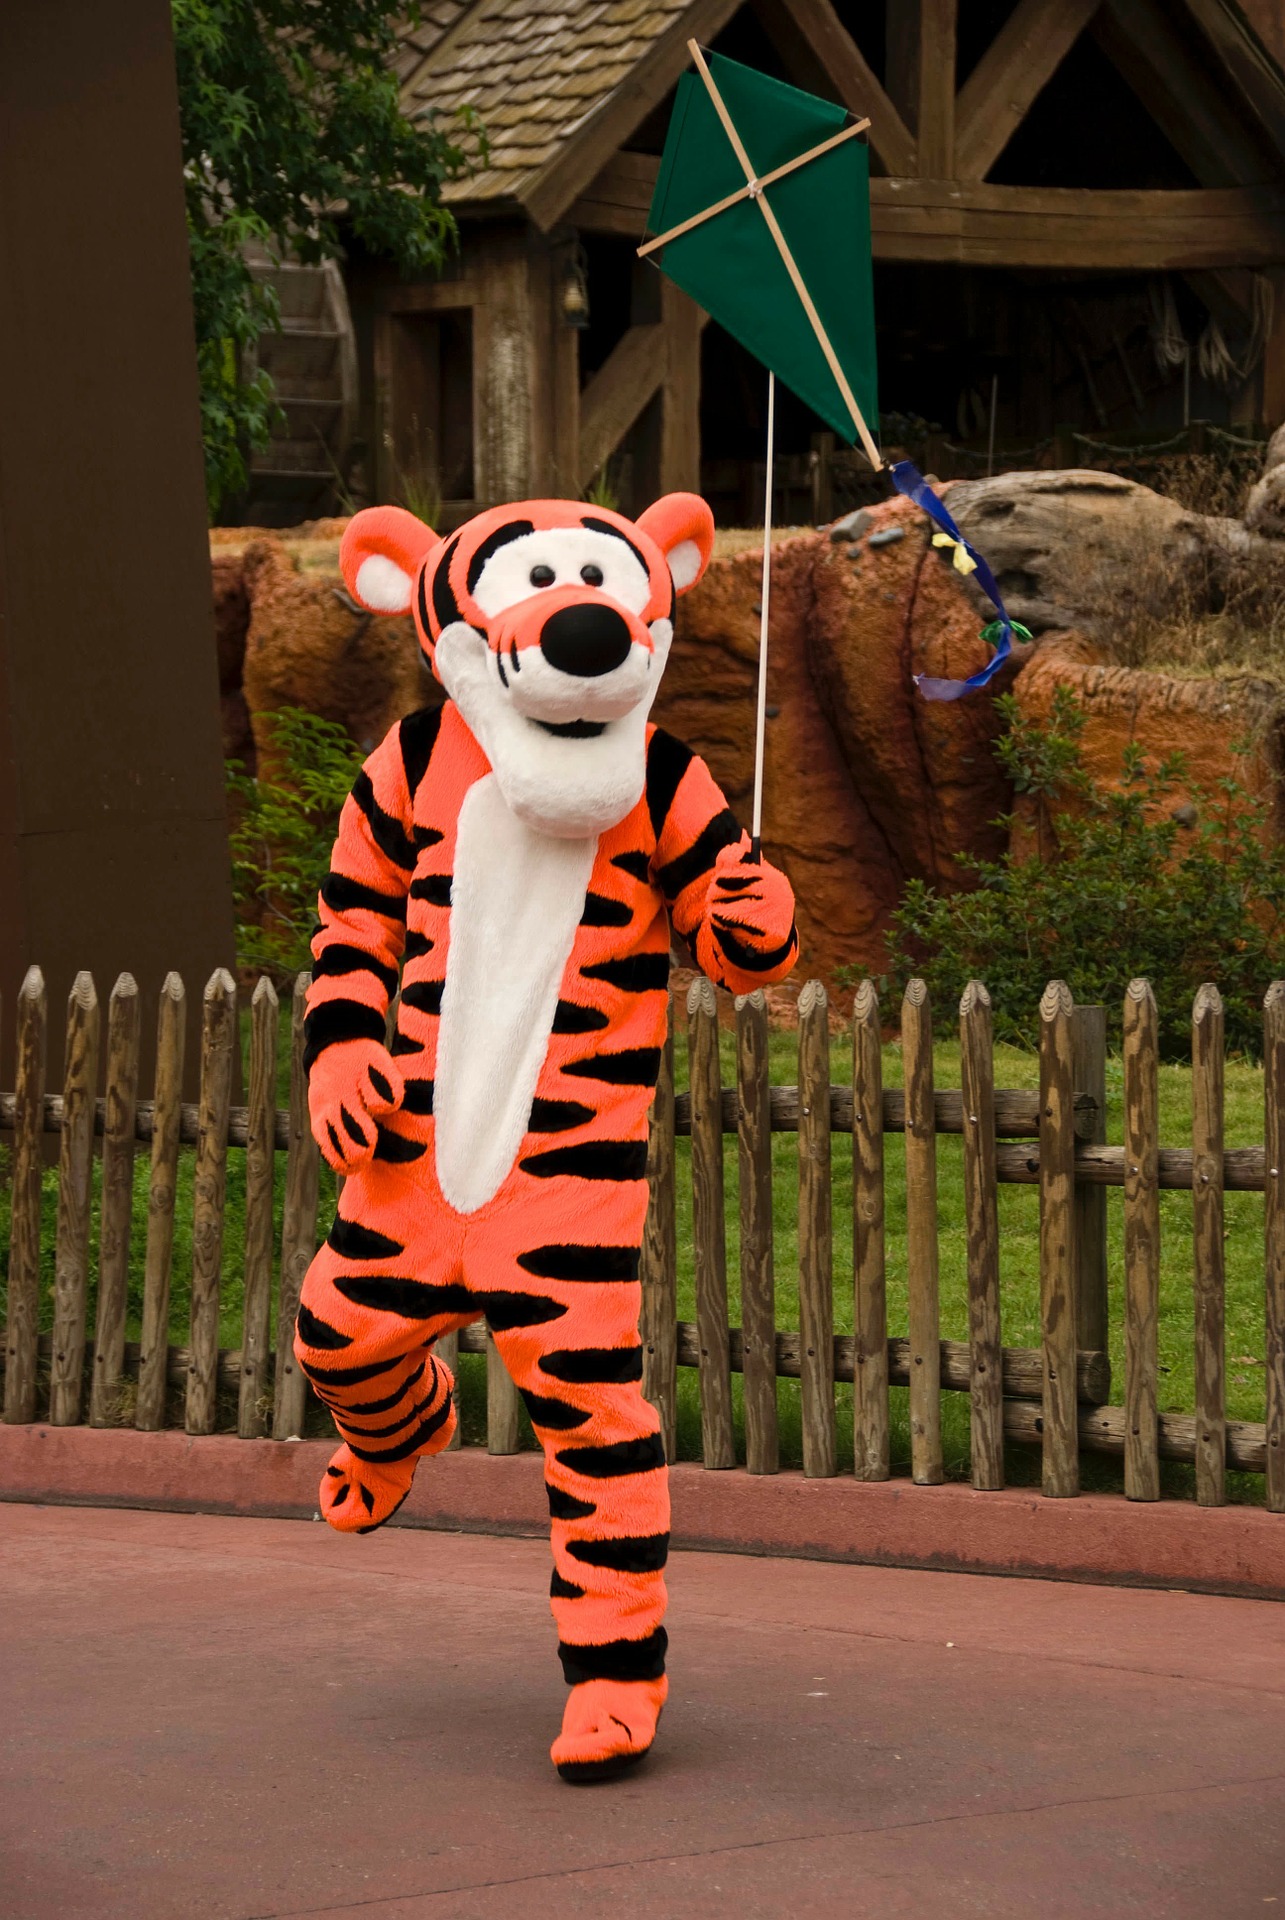 A photograph of someone in a Walt Disney Tigger outfit skipping with a kite